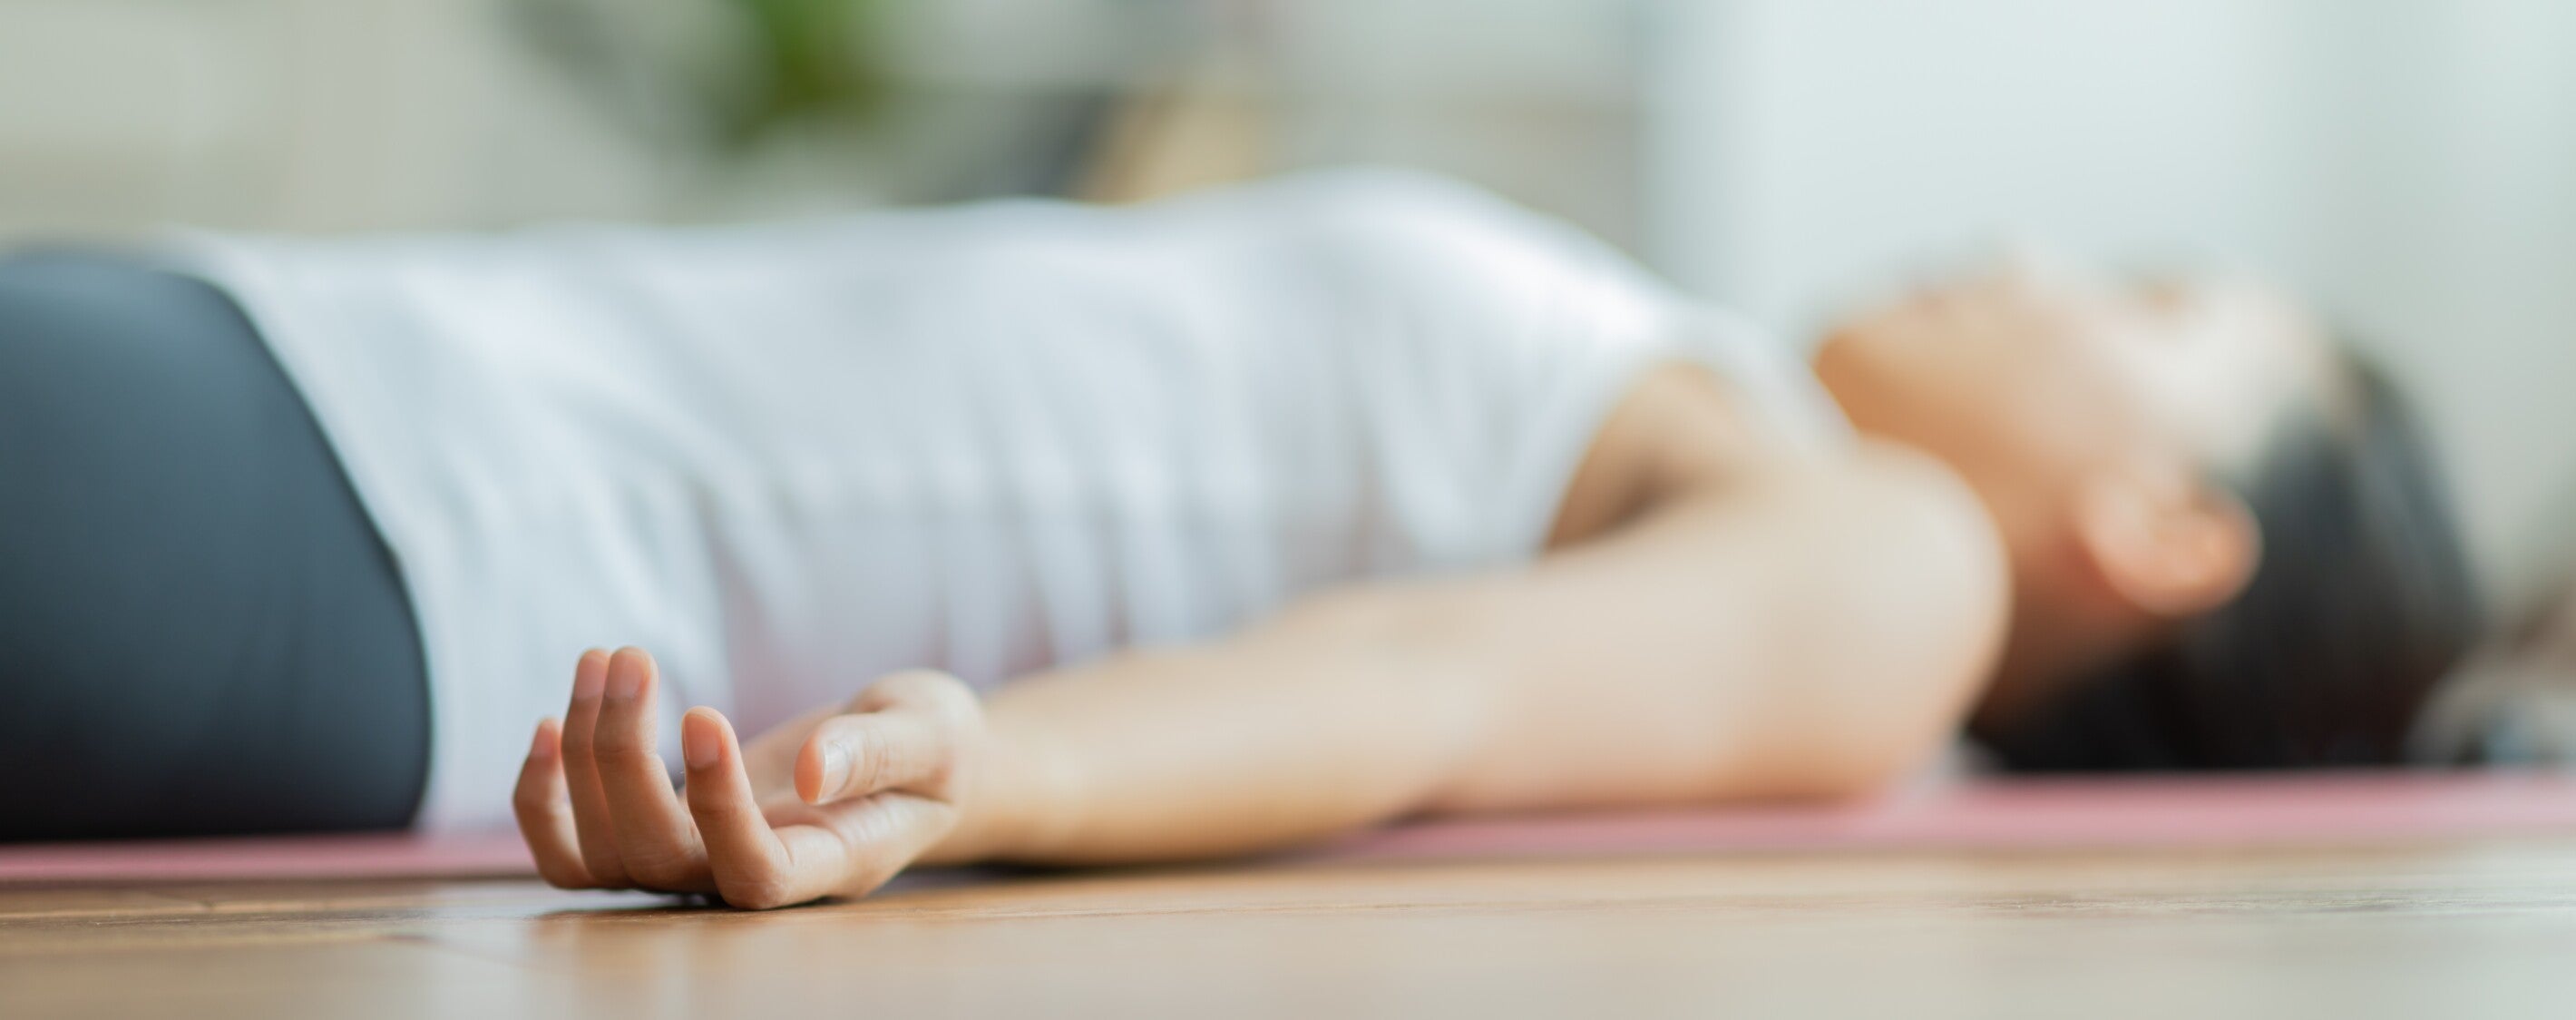 3 Restorative Yoga Poses You Need to Know for Ultimate Stress Relief